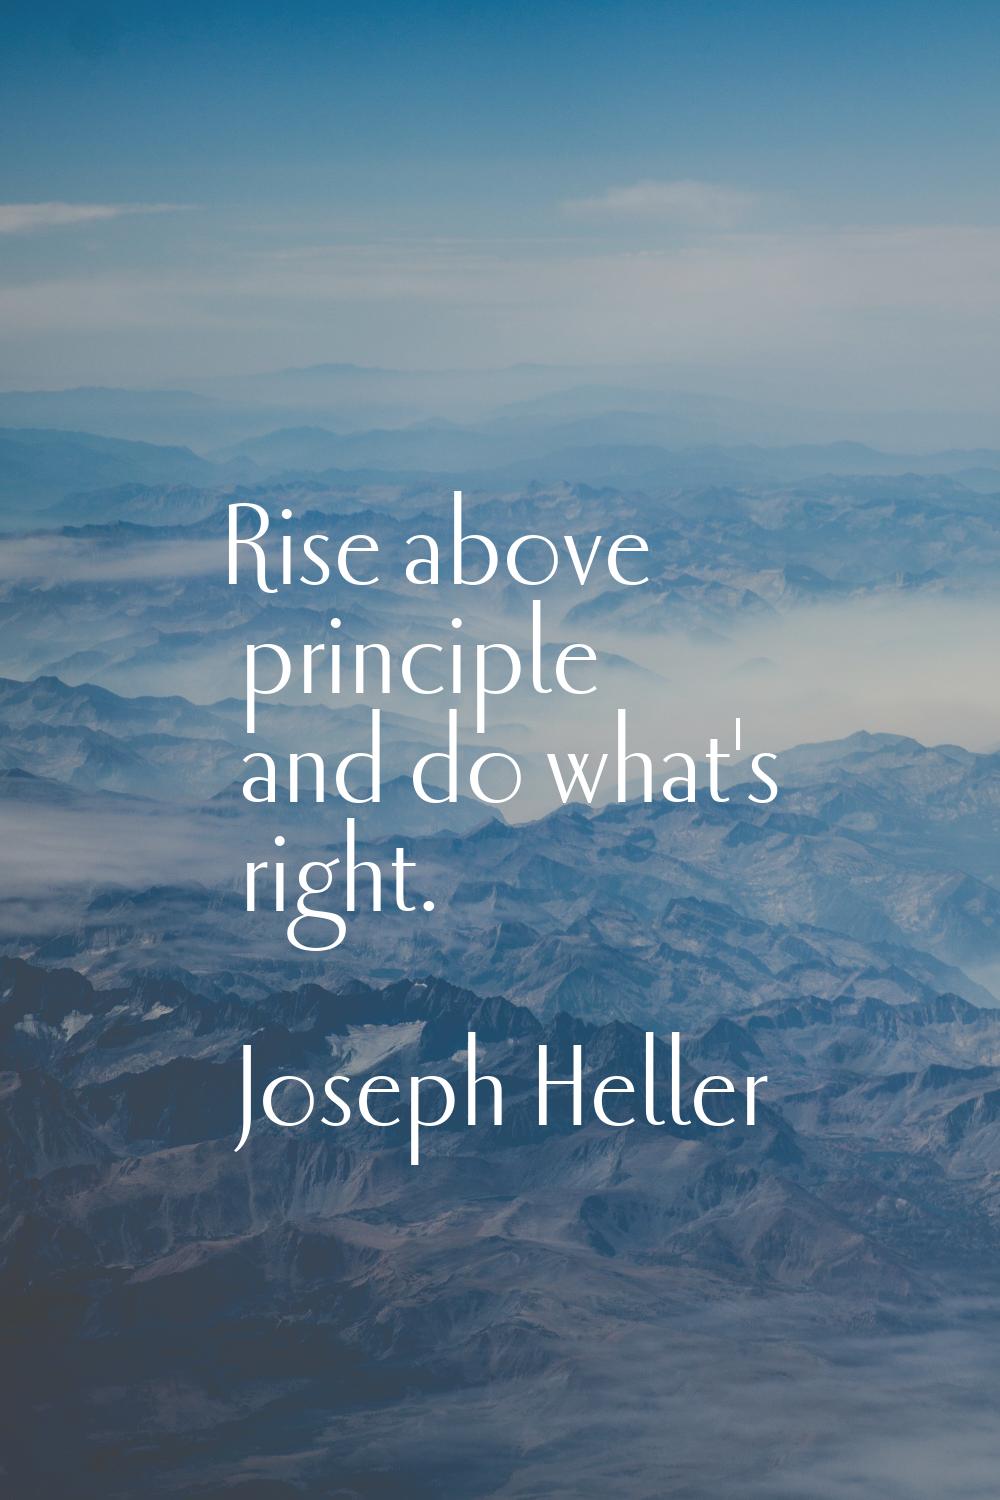 Rise above principle and do what's right.